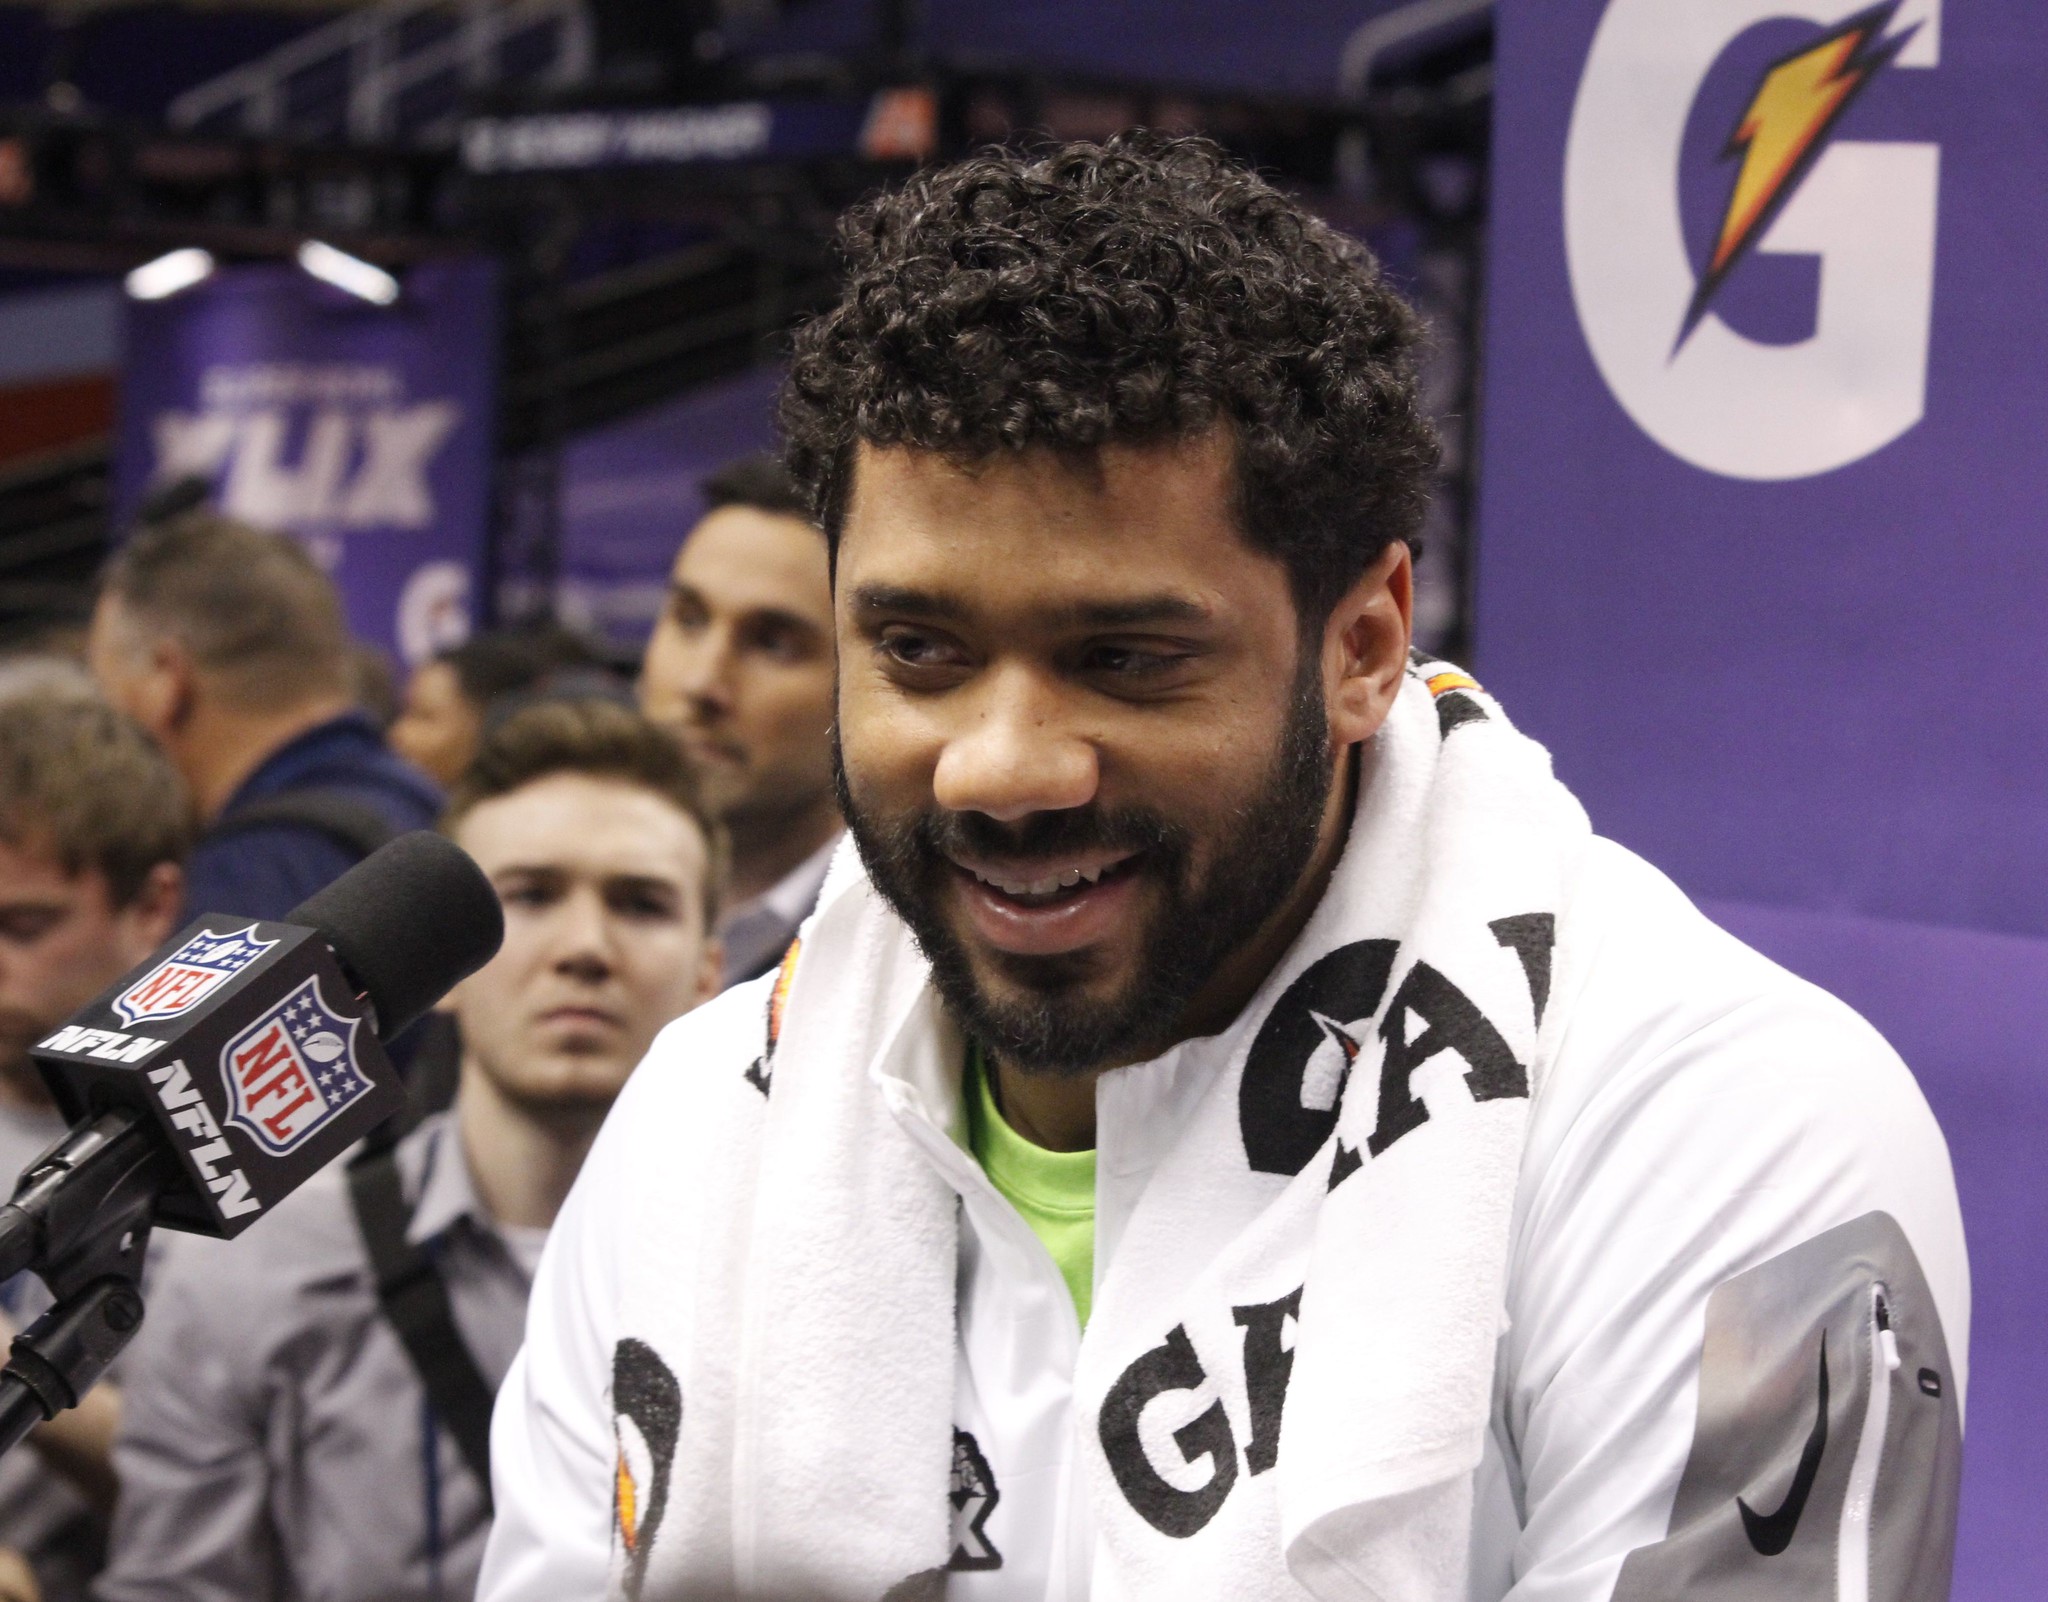 Forget Watches or Cars, Russell Wilson Gifted His Offensive Lineman Amazon Stock